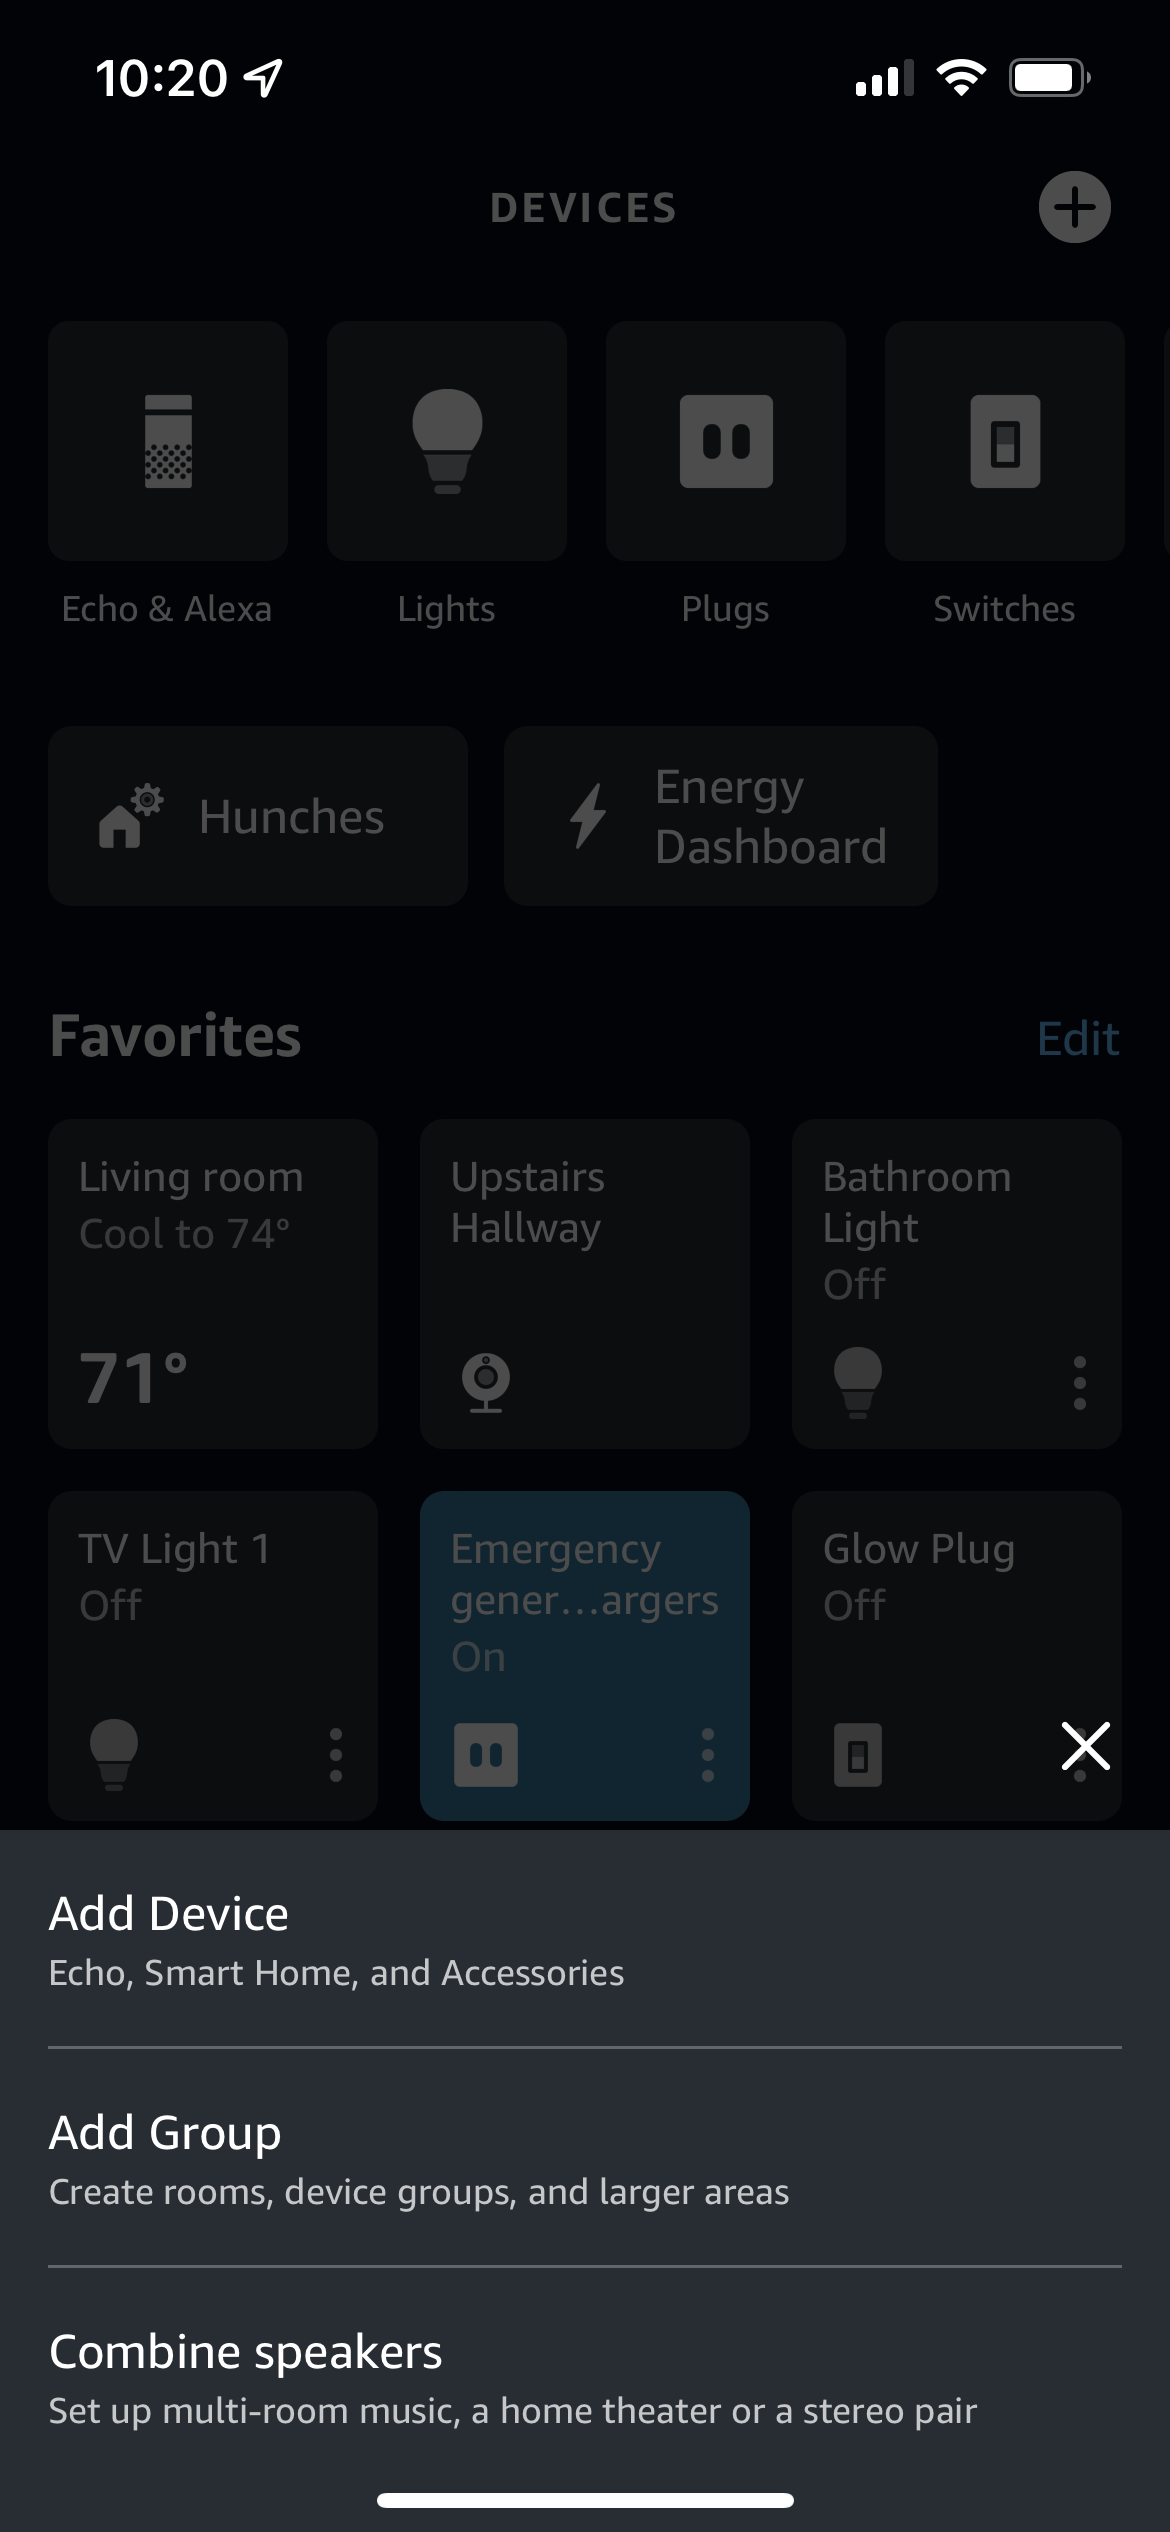 The Add Devices option in the Amazon Alexa app